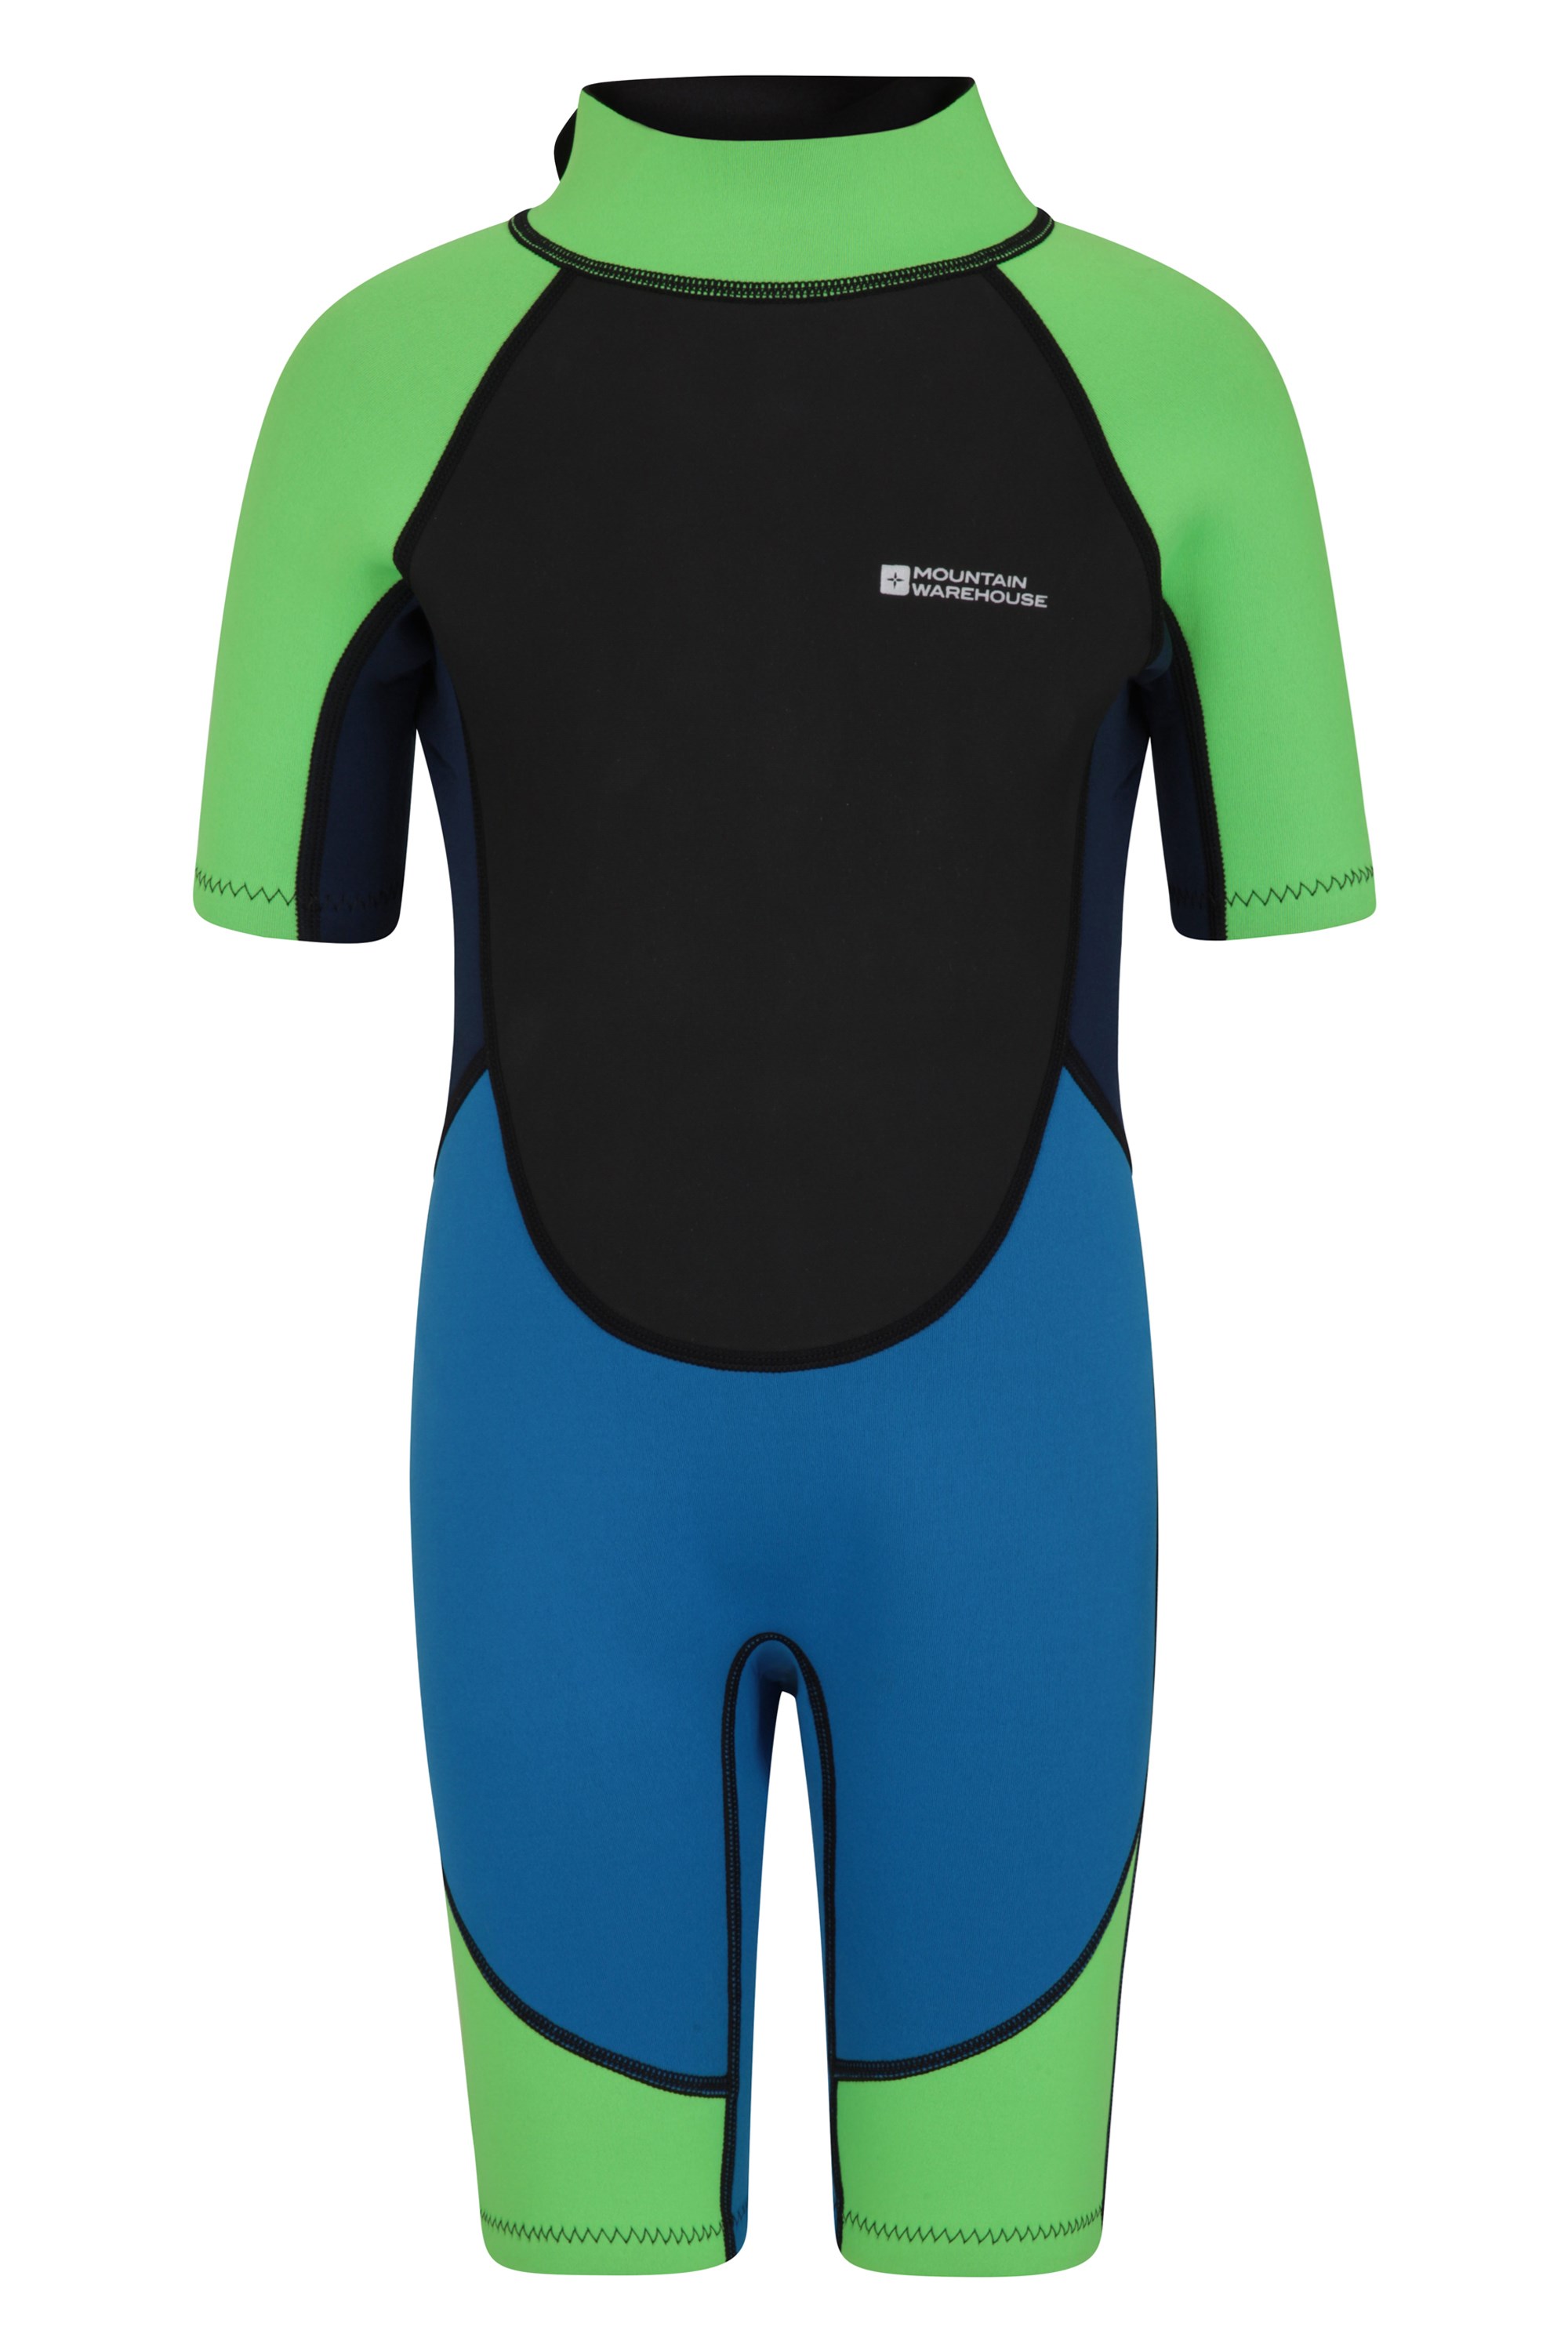 for Diving Flat Seams Childrens Wetsuit Neoprene Kids Wetsuit Mountain Warehouse Junior Shorty Wetsuit Easy Glide Zip Summer Wetsuit Adjustable Neck Swimming Suit 